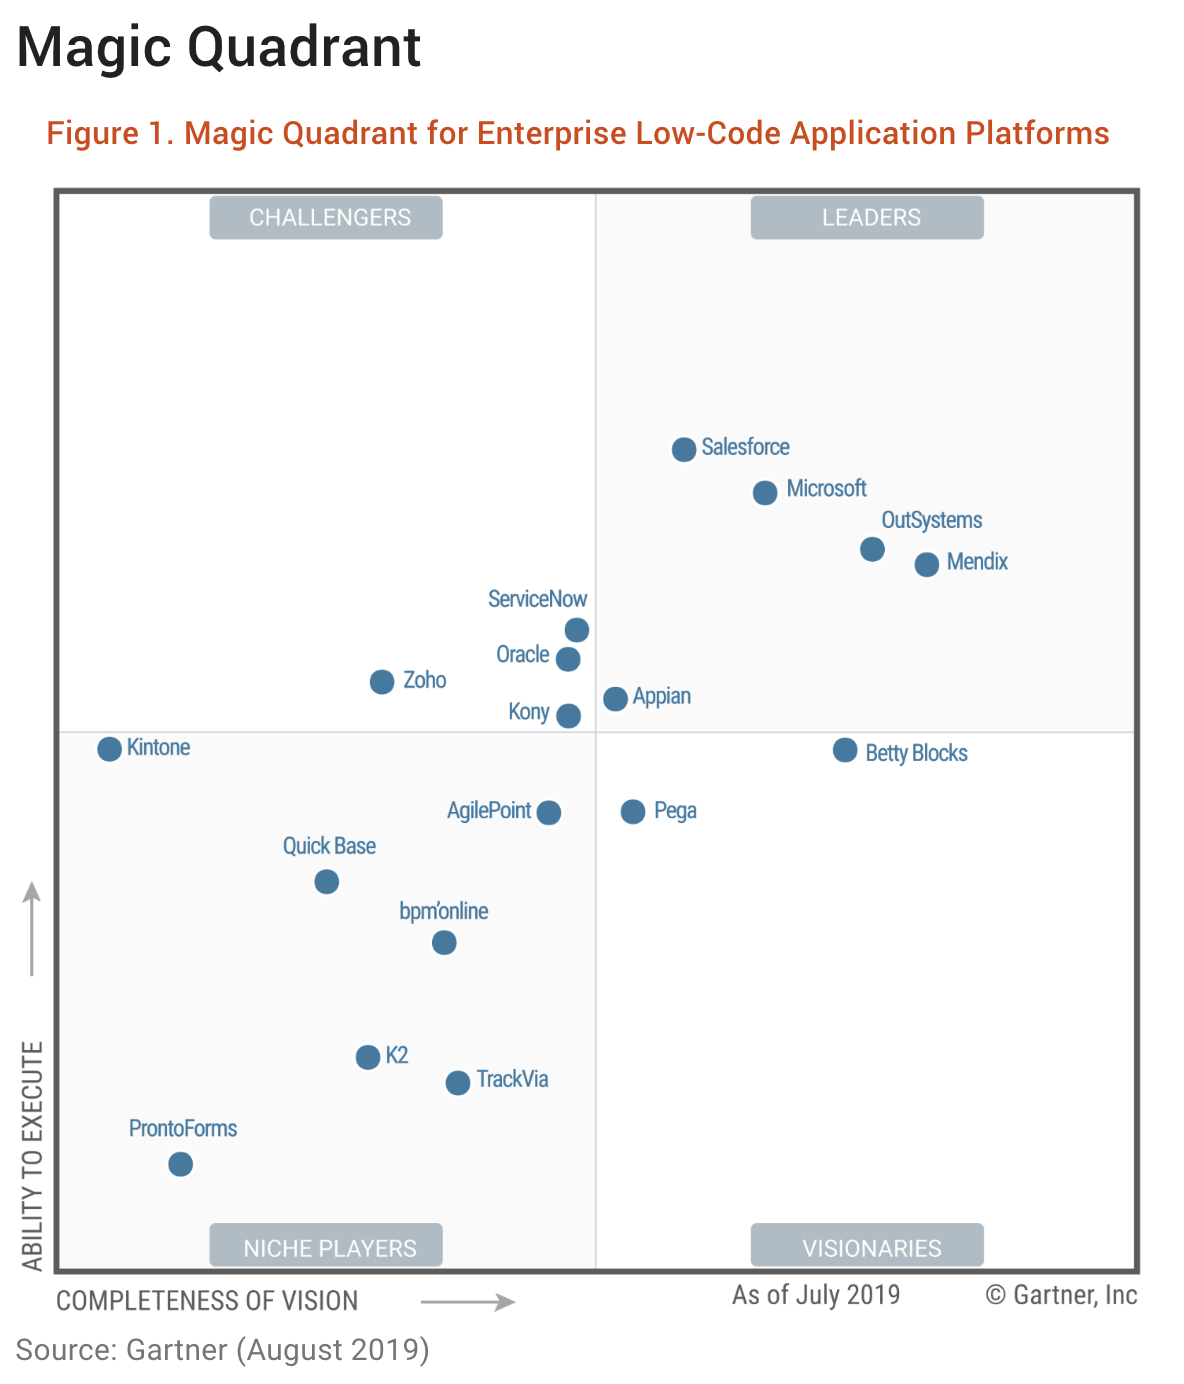 This is the third consecutive year Gartner has recognized Kintone in this Magic Quadrant report, and Kintone was one of 18 vendors positioned in the Magic Quadrant.